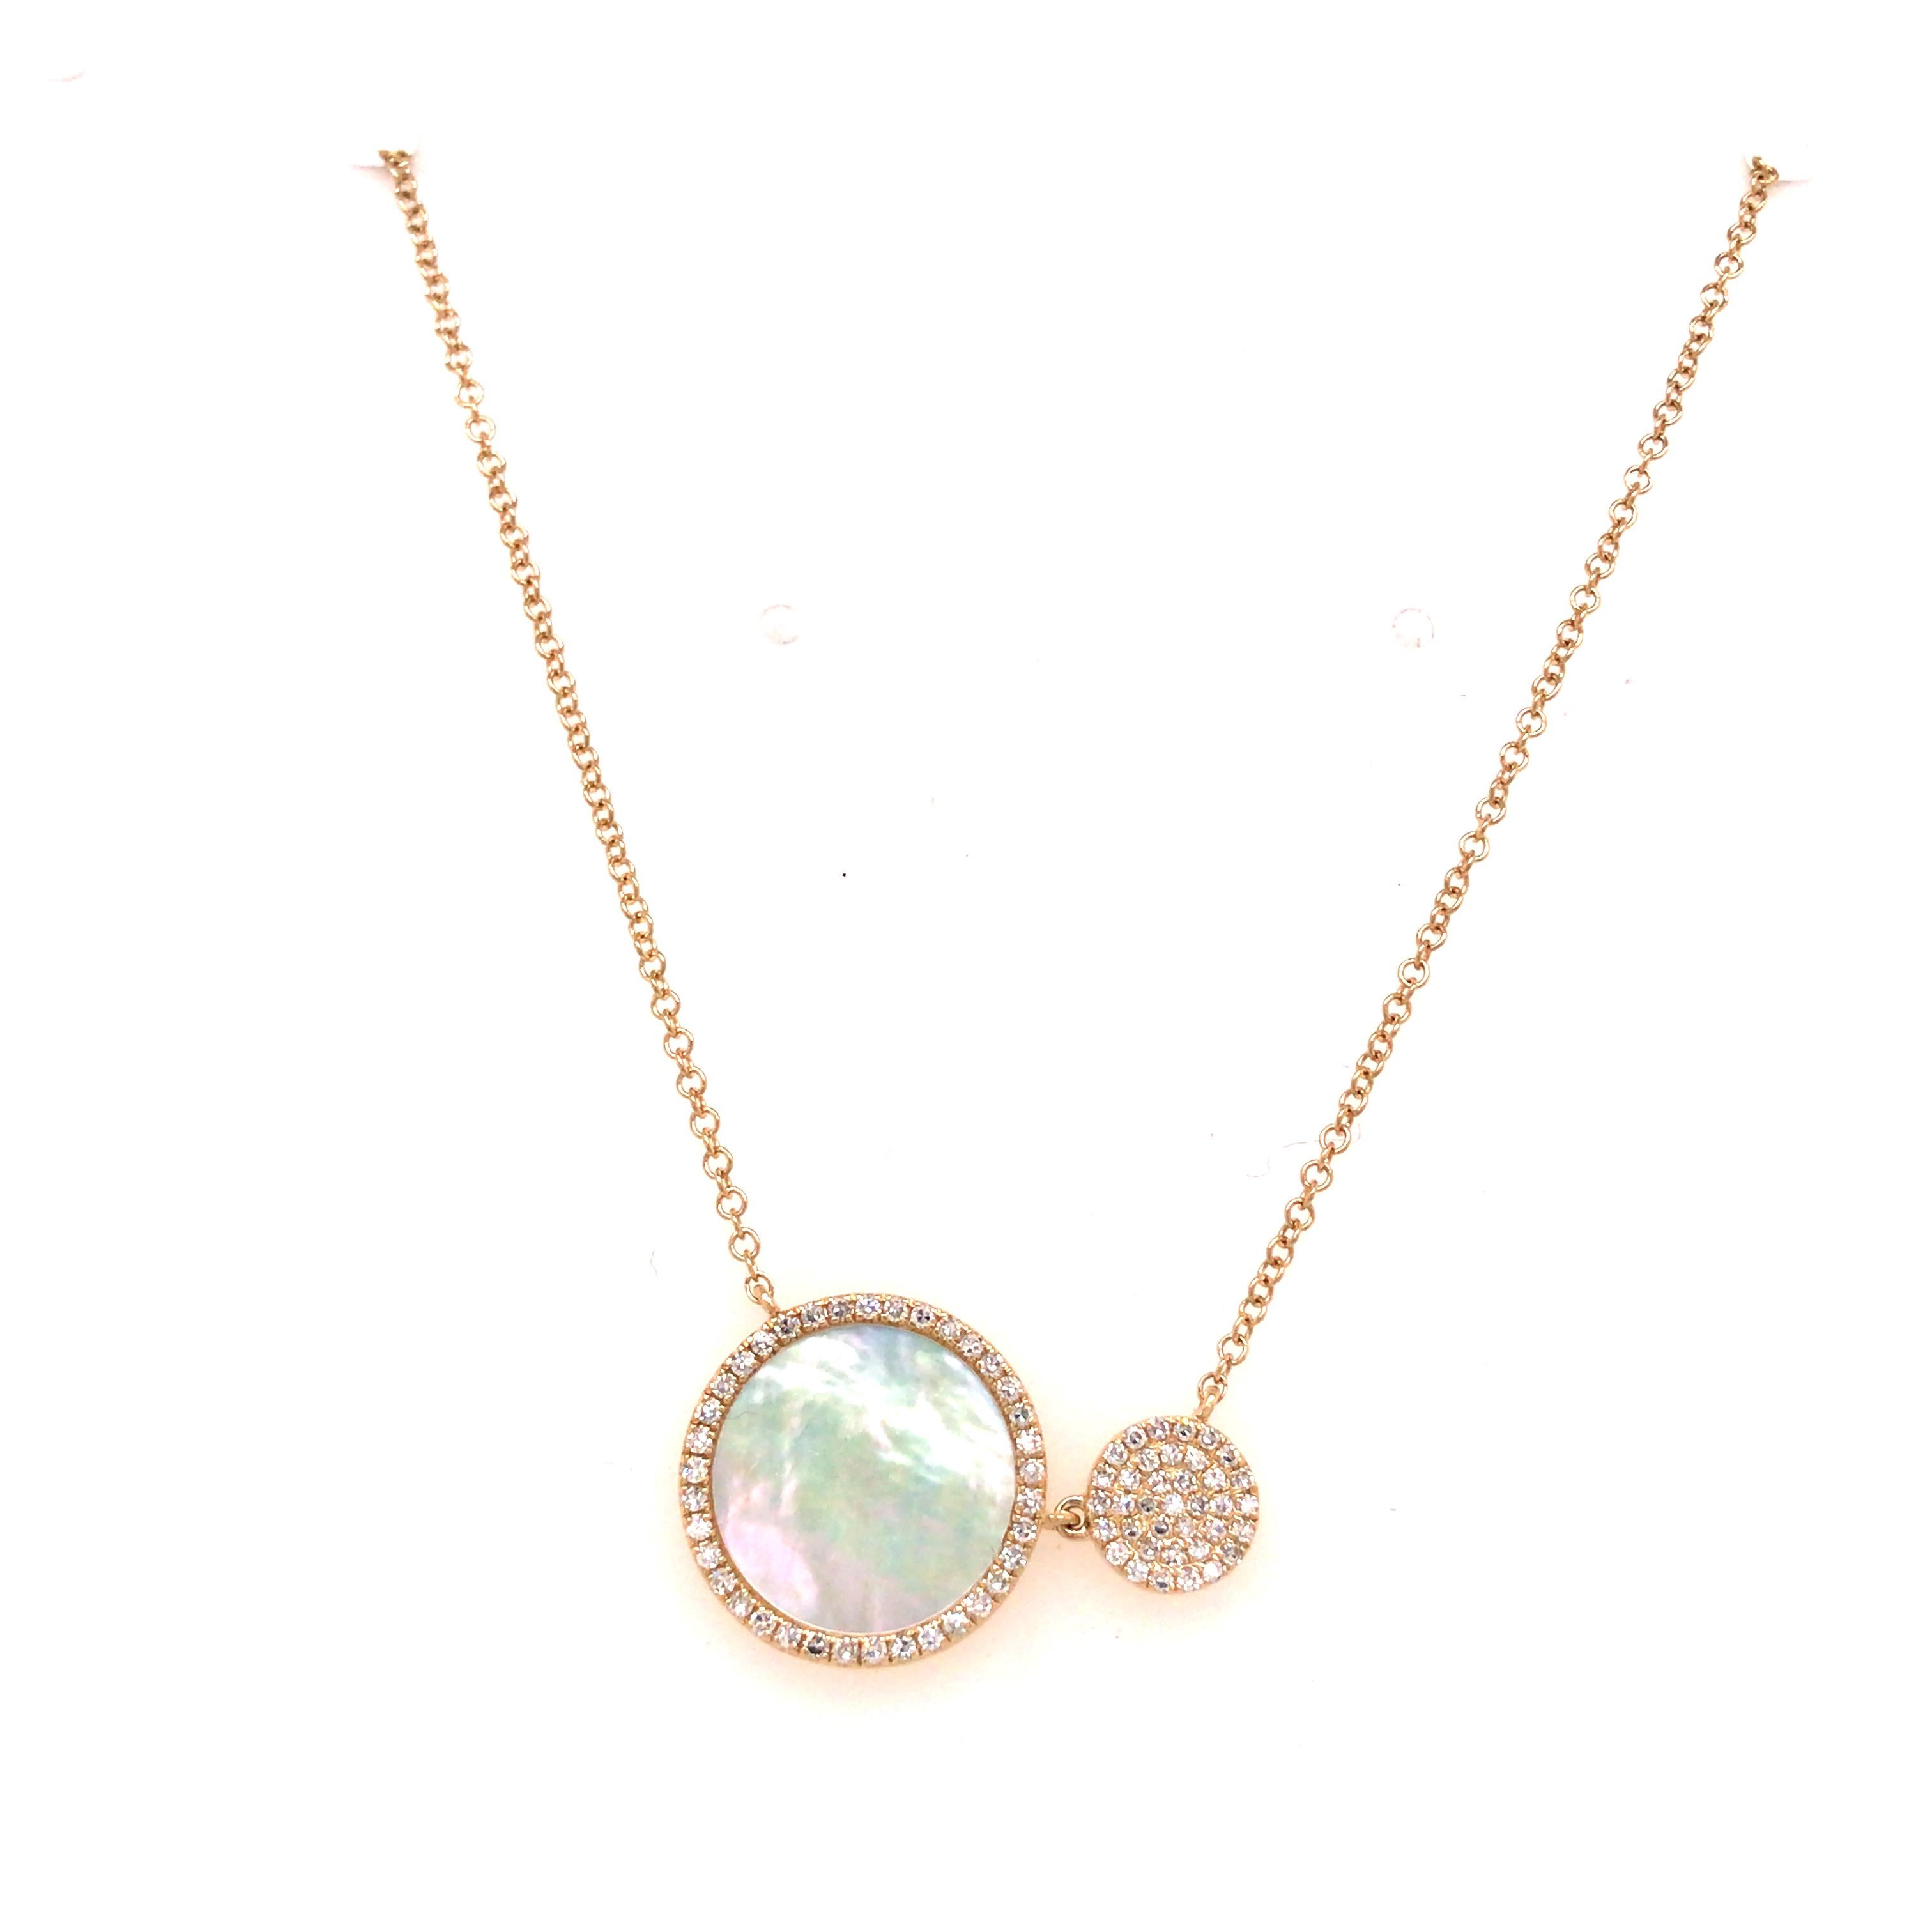 Mother of Pearl and Diamond Necklace in 14K Yellow Gold.  (74) Round Brilliant Cut Diamonds weighing 0.20 carat total weight, G-H in color and VS-SI in clarity are expertly set.  The double-circle Pendant measures 7/8 inch in length and 1/2 inch in